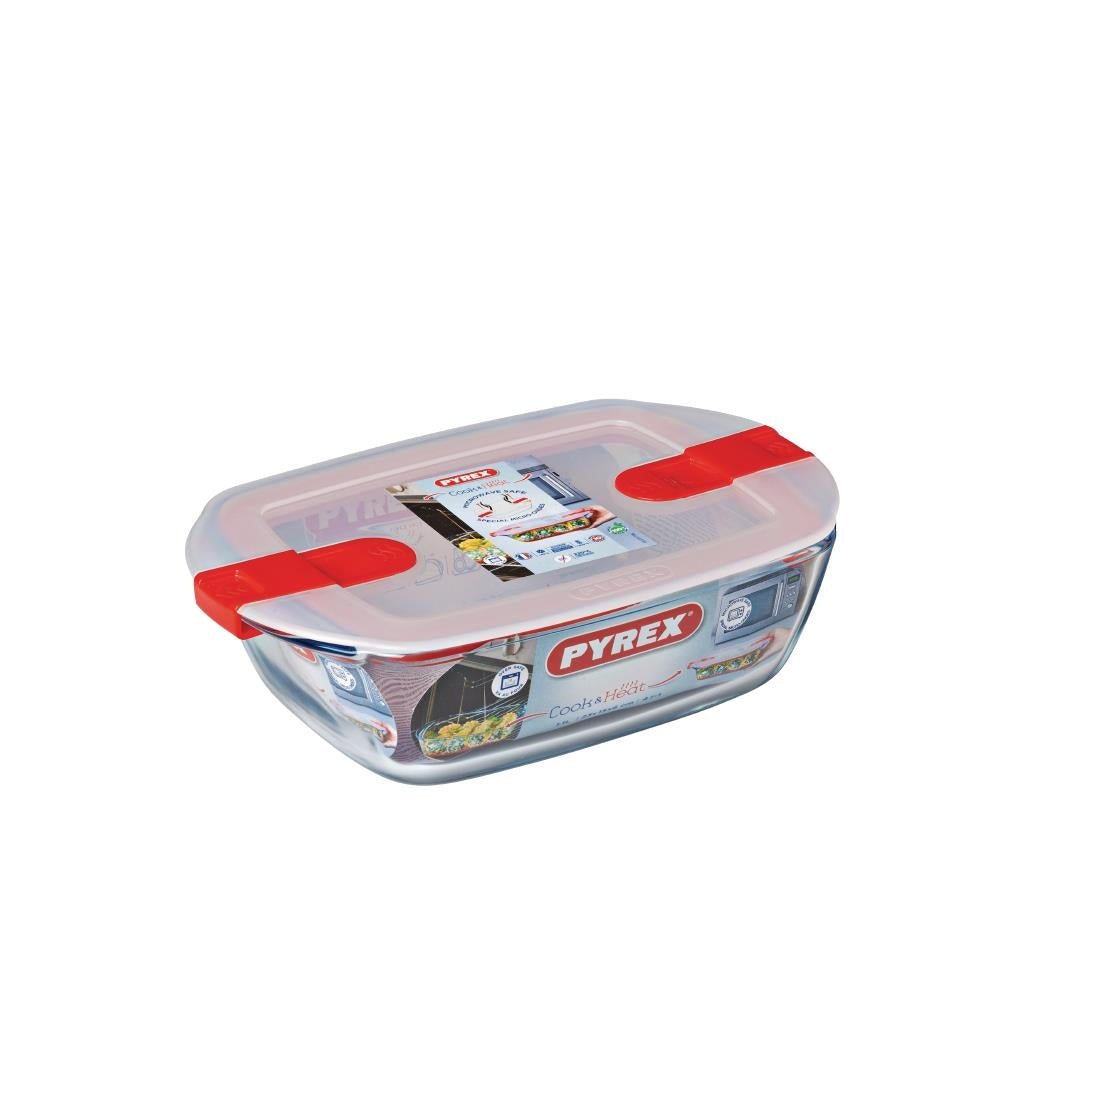 FC367 Pyrex Cook and Heat Rectangular Dish with Lid 1Ltr JD Catering Equipment Solutions Ltd